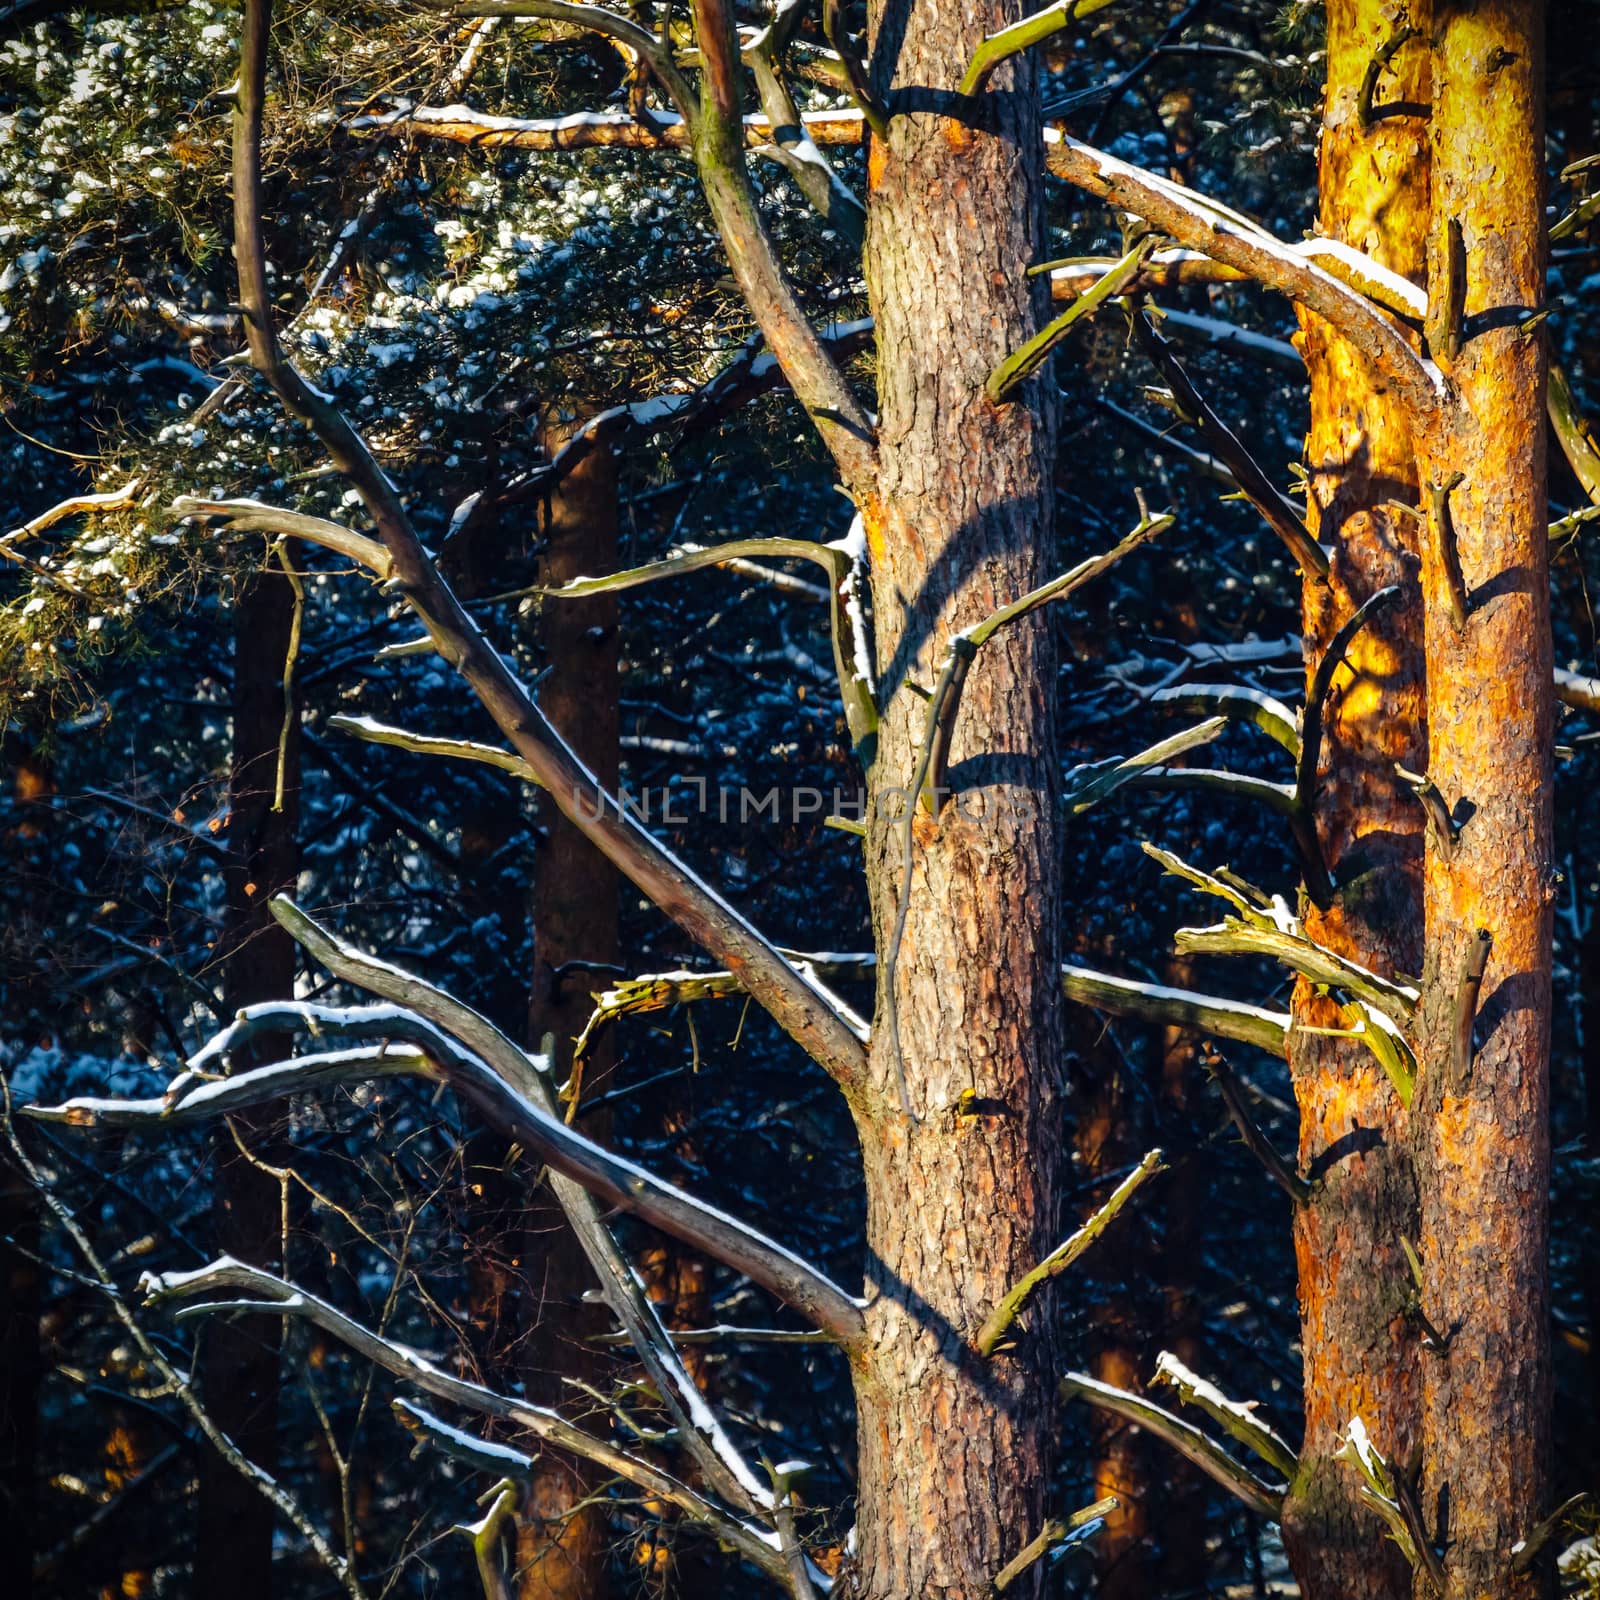 Sunlight in the cold forest, nature series